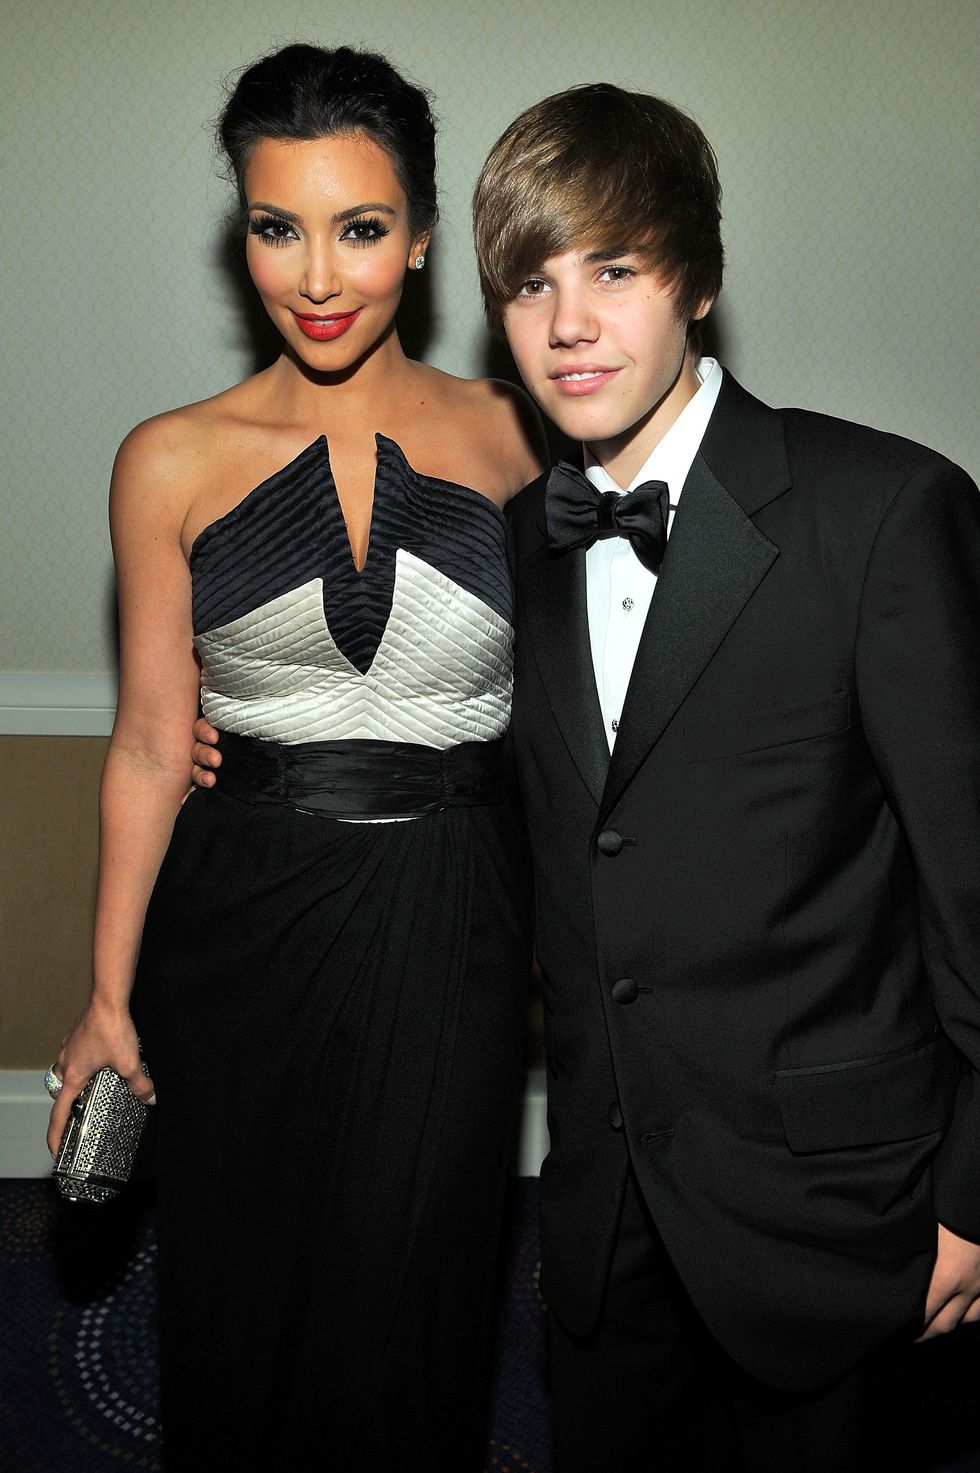 washington may 01 kim kardashian and justin bieber attend the timecnnpeoplefortune 2010 white house correspondents dinner pre party at hilton washington hotel on may 1, 2010 in washington, dc photo by larry busaccagetty images for time inc